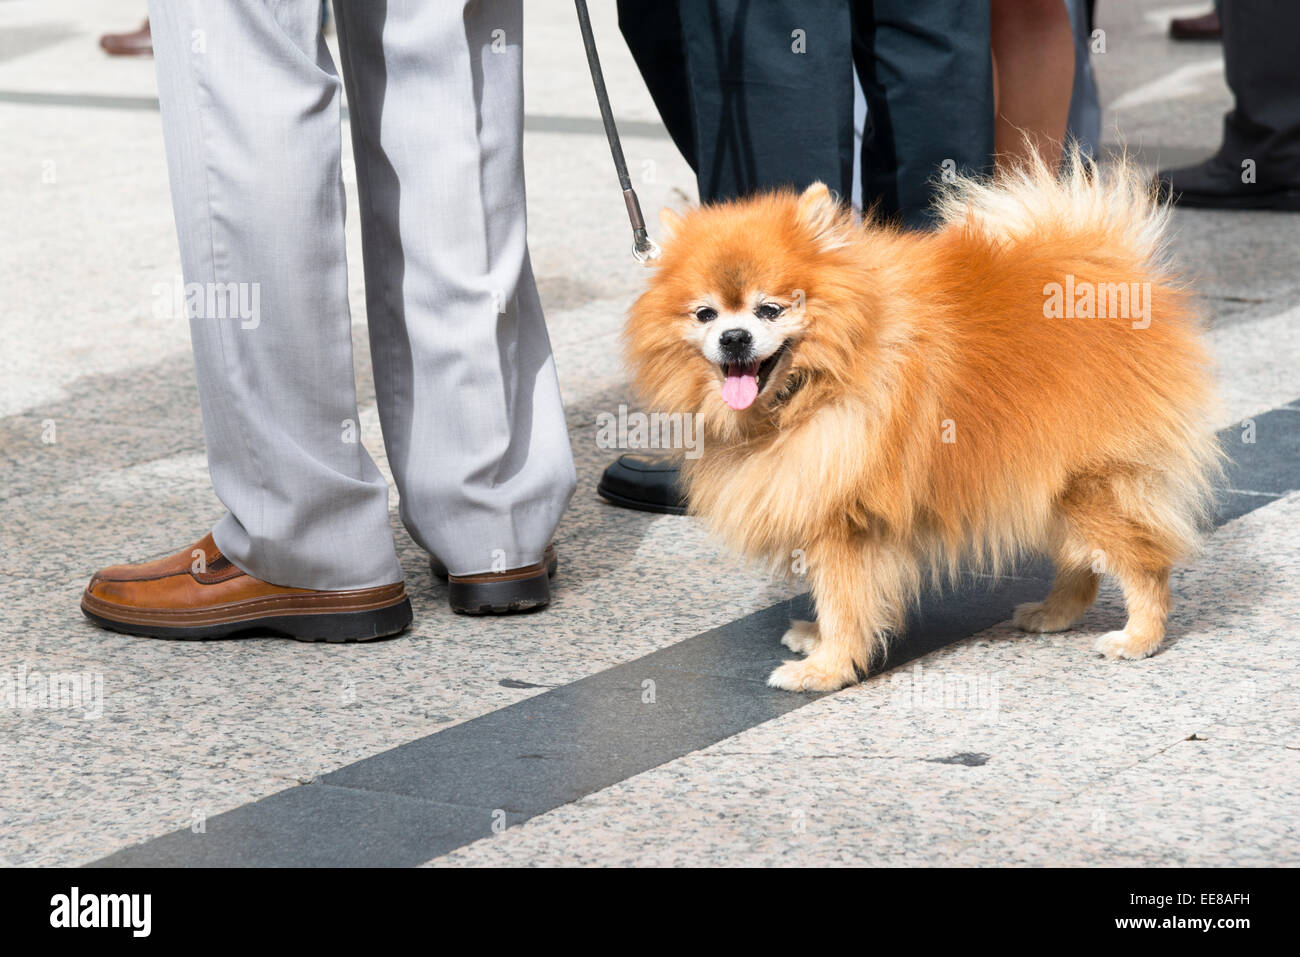 A Pekinese dog on a lead standing behind its owner on a street in Spain Stock Photo